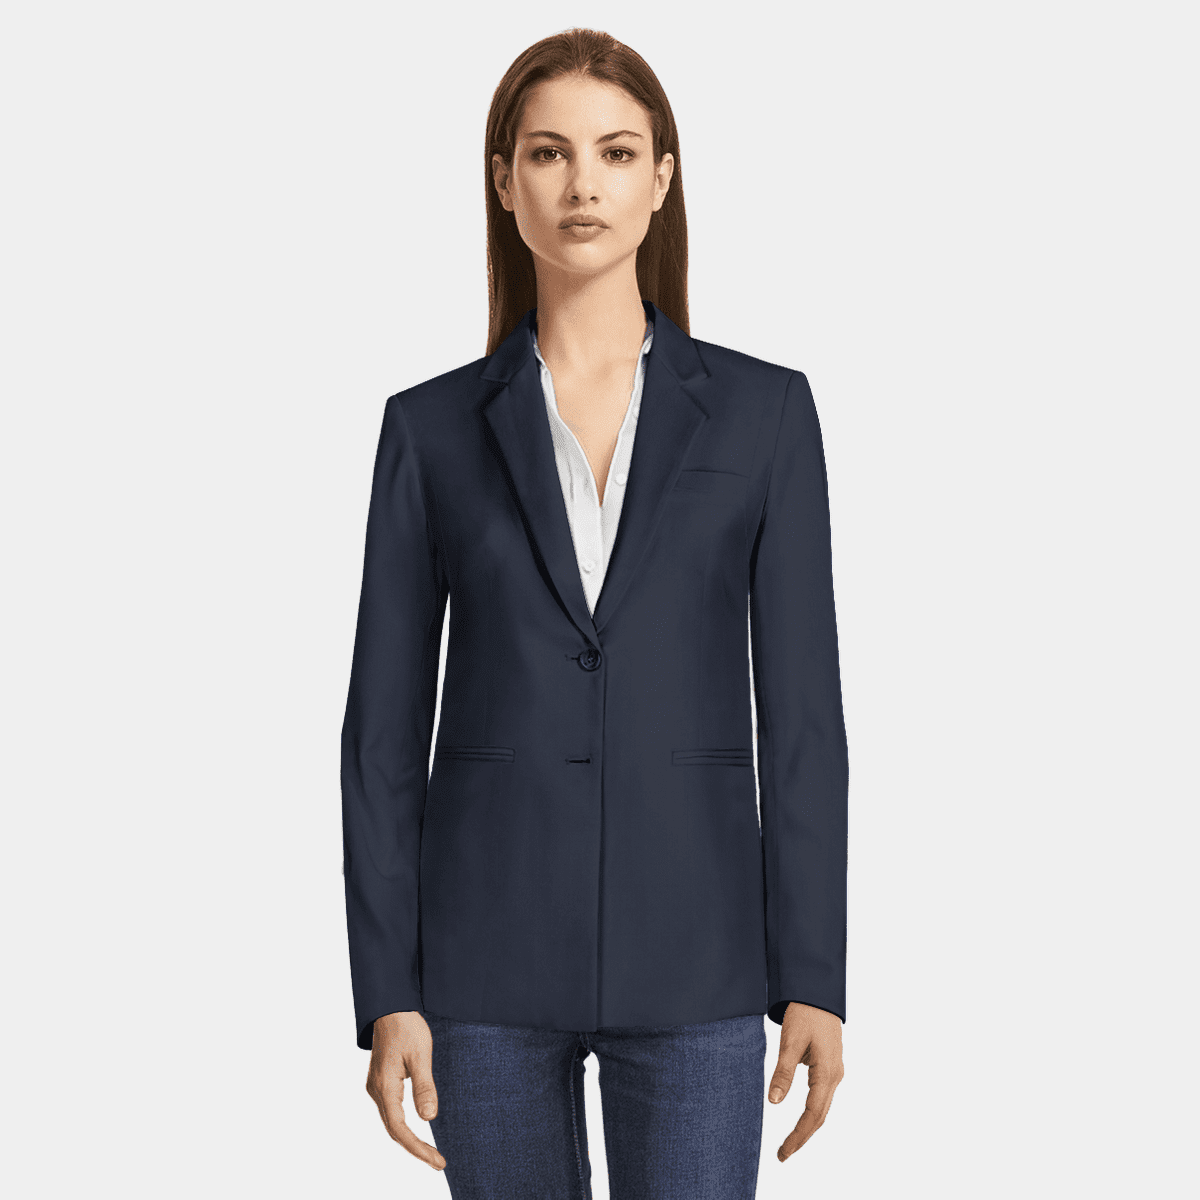 Navy Blue Blazer - relaxed fit